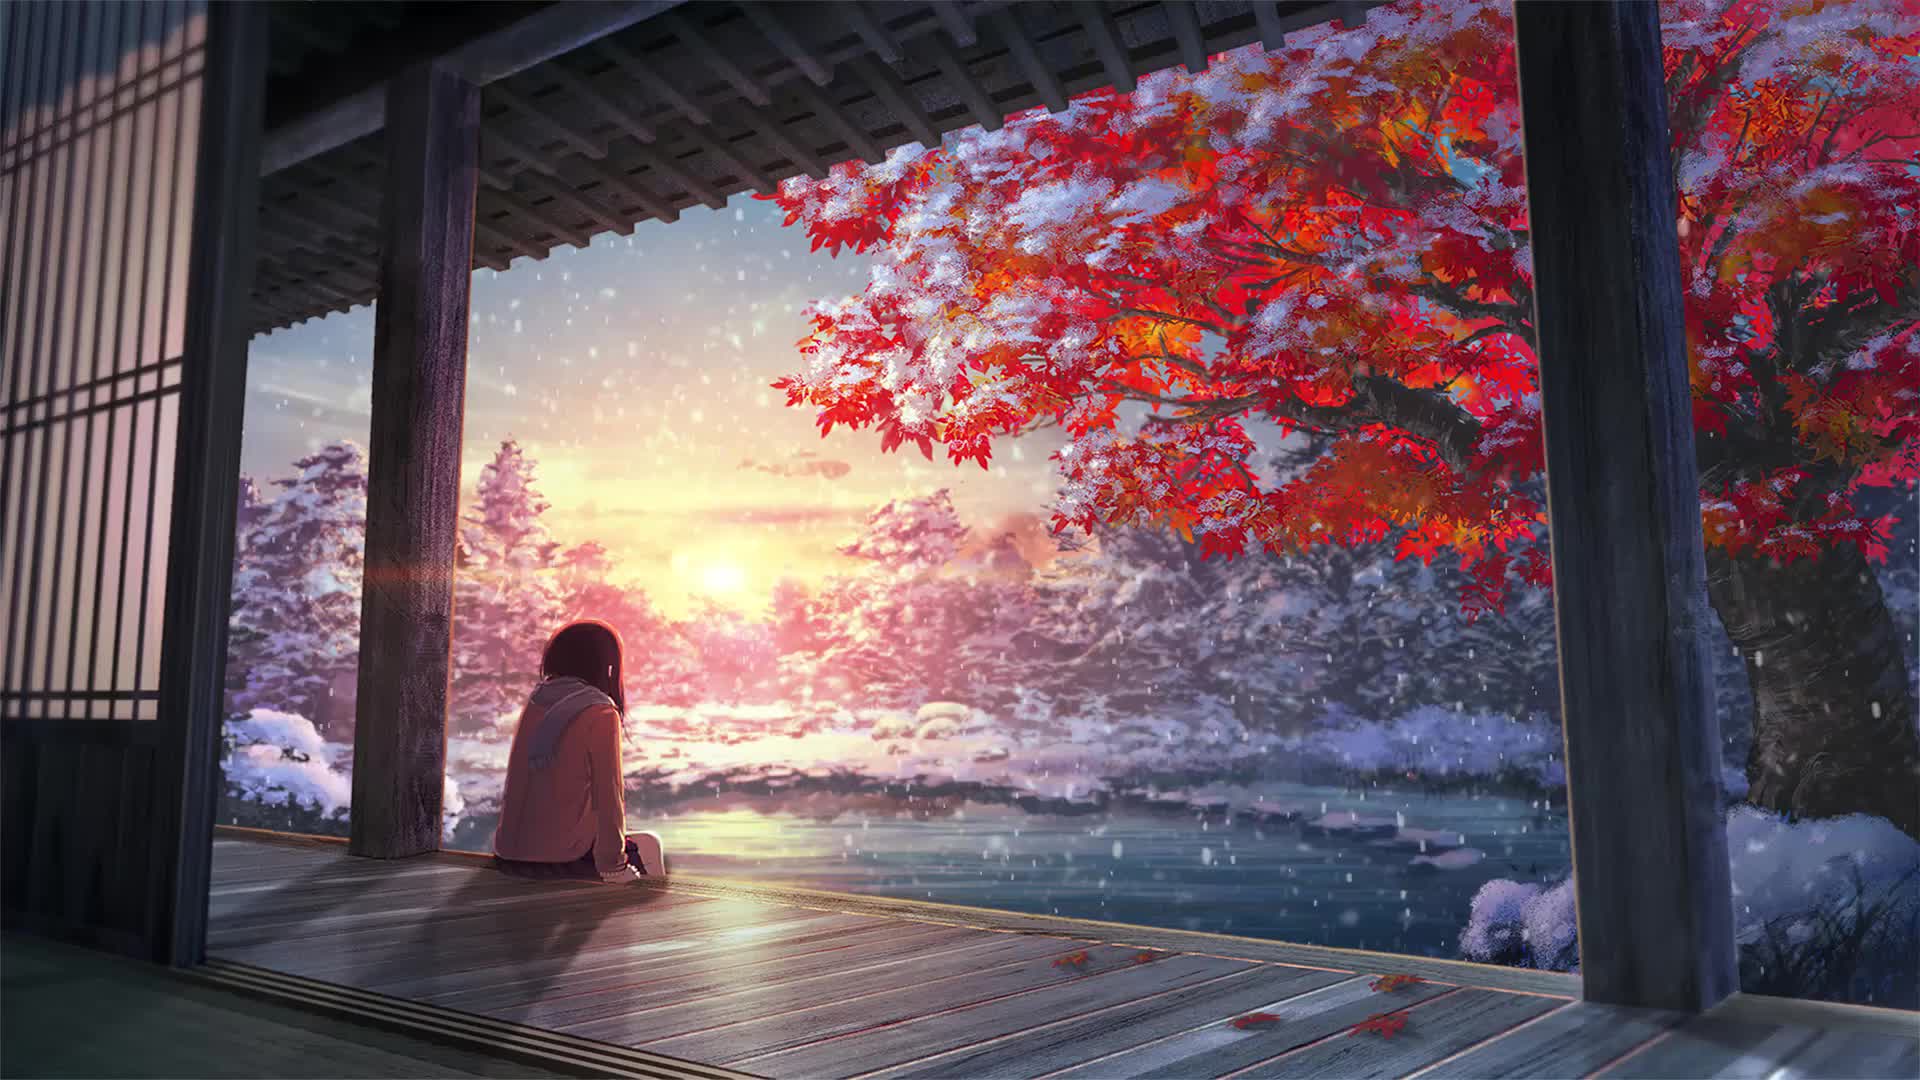 In The Snow Anime Girl Live Wallpaper